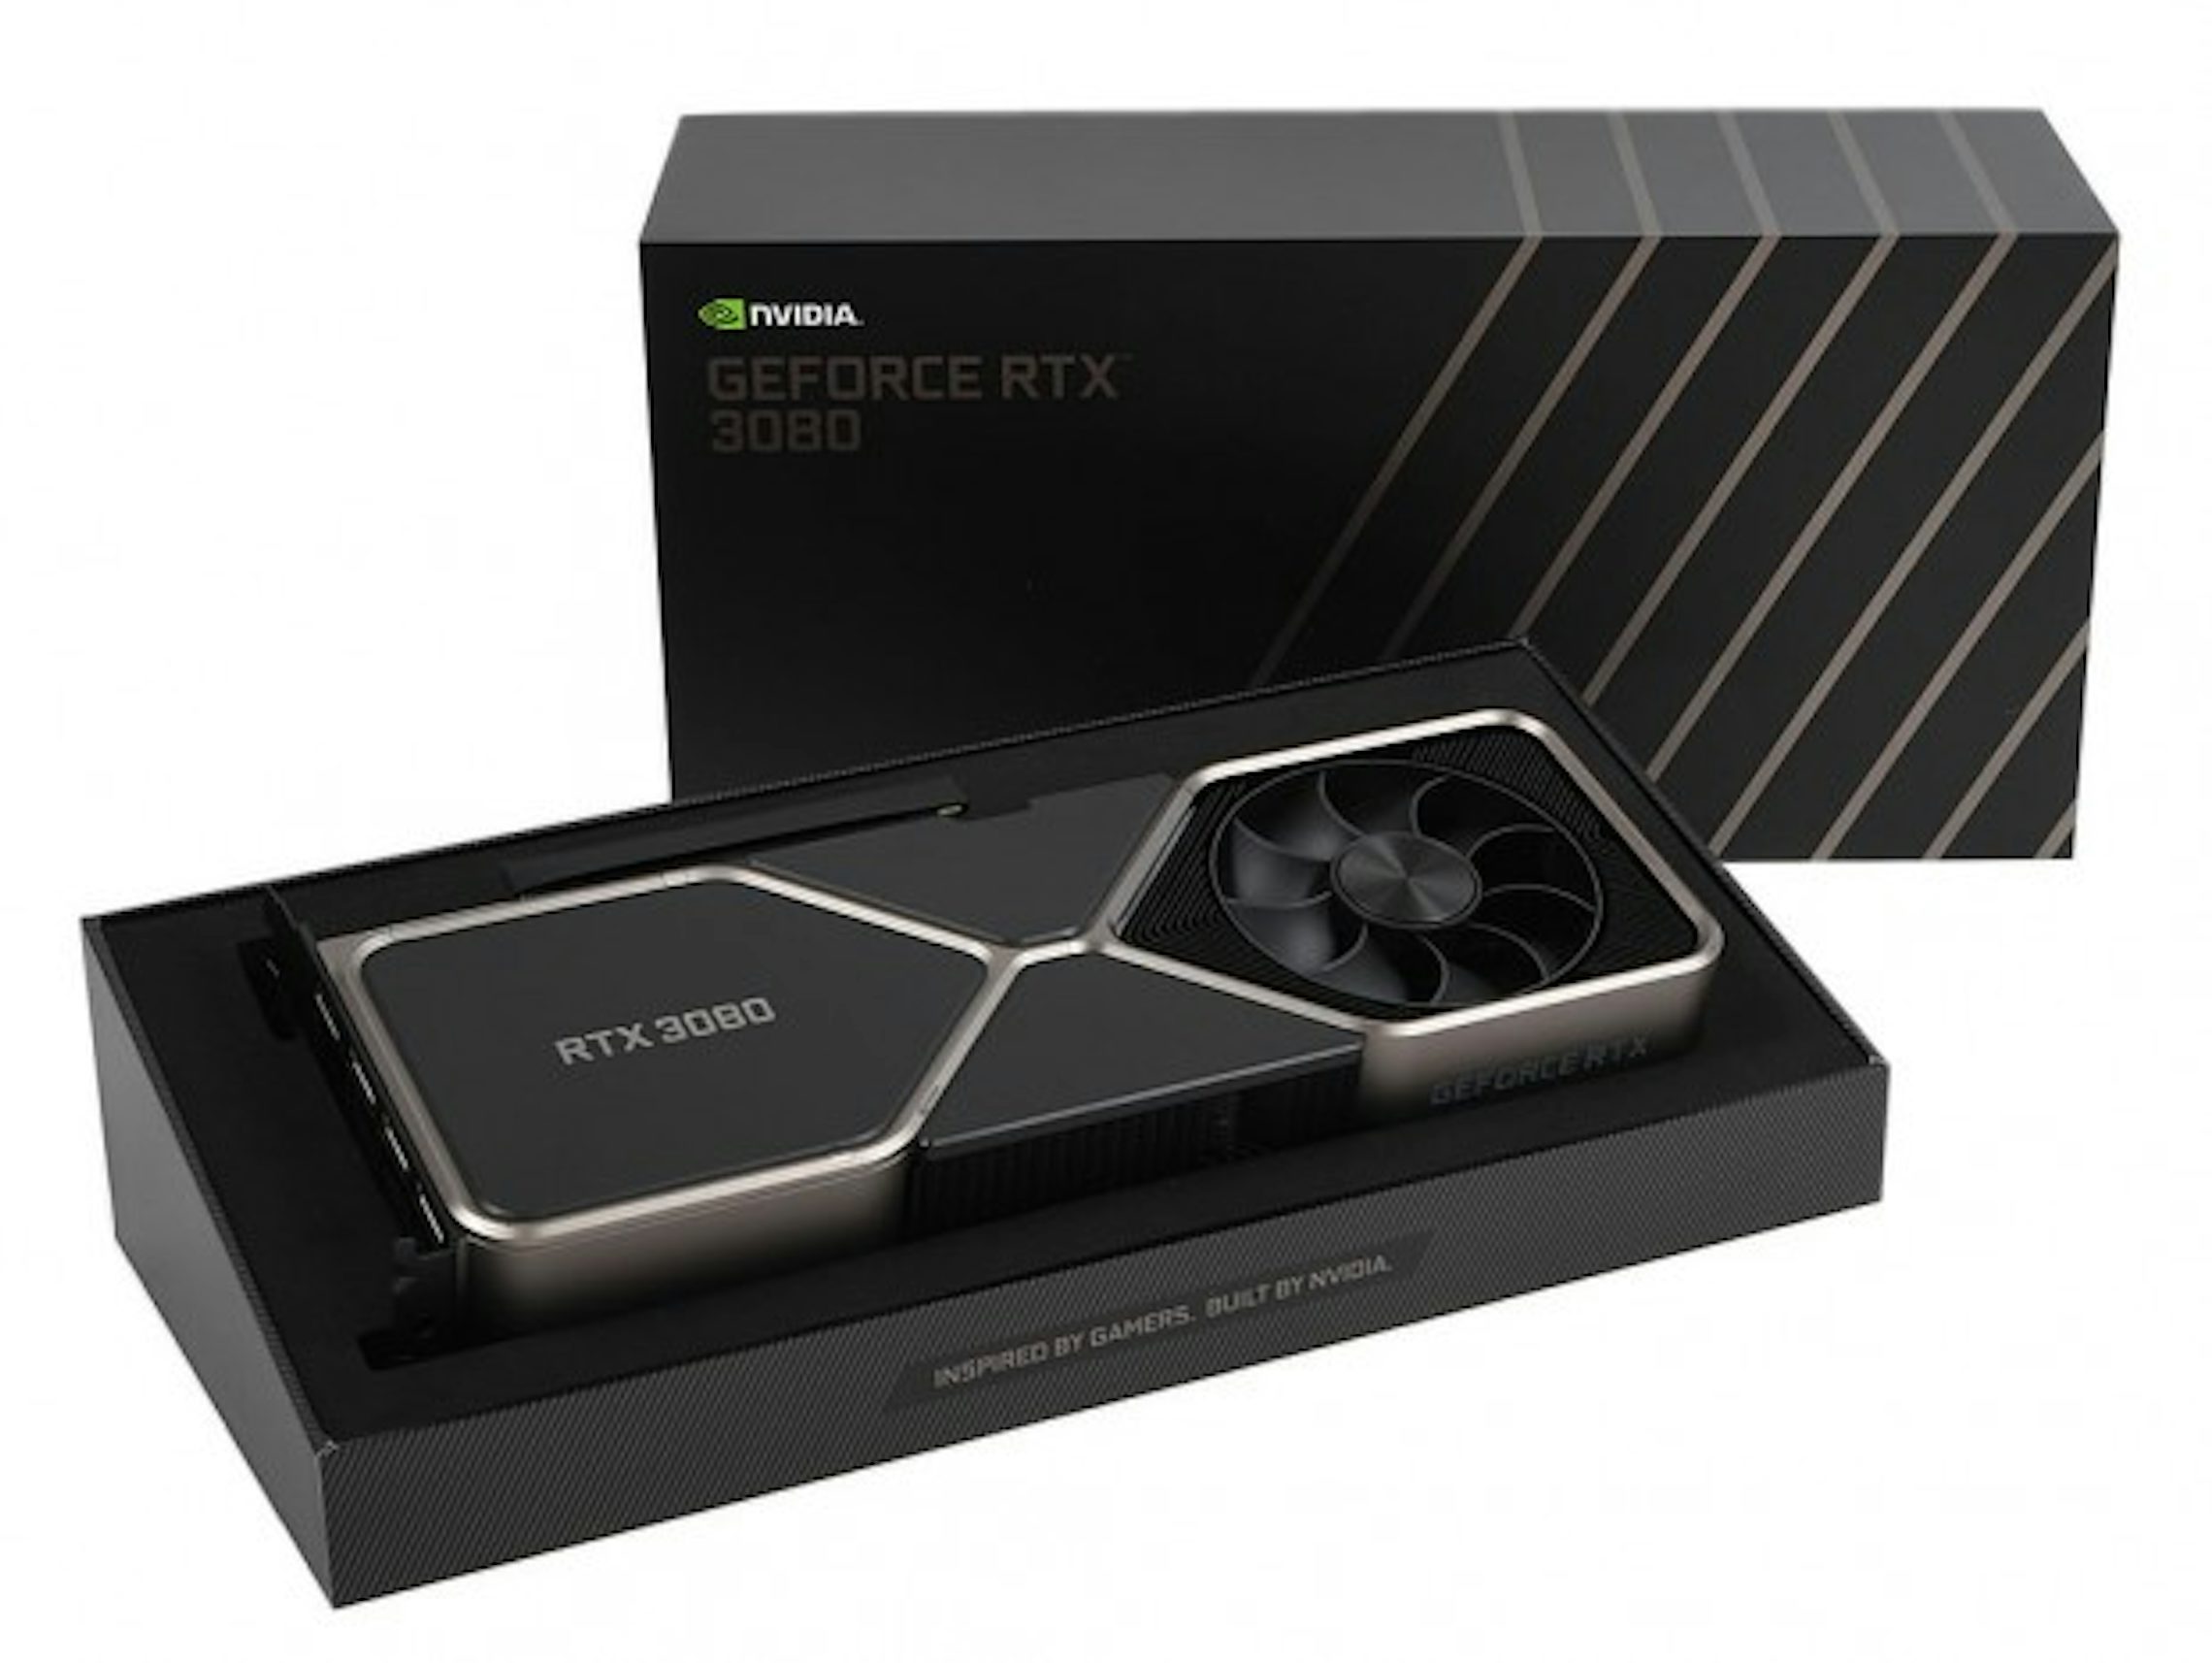 https://images.stockx.com/images/NVIDIA-NVIDIA-GeForce-RTX-3080-Graphics-Card-Founders-Edition-5.jpg?fit=fill&bg=FFFFFF&w=1200&h=857&fm=jpg&auto=compress&dpr=2&trim=color&updated_at=1640285295&q=60